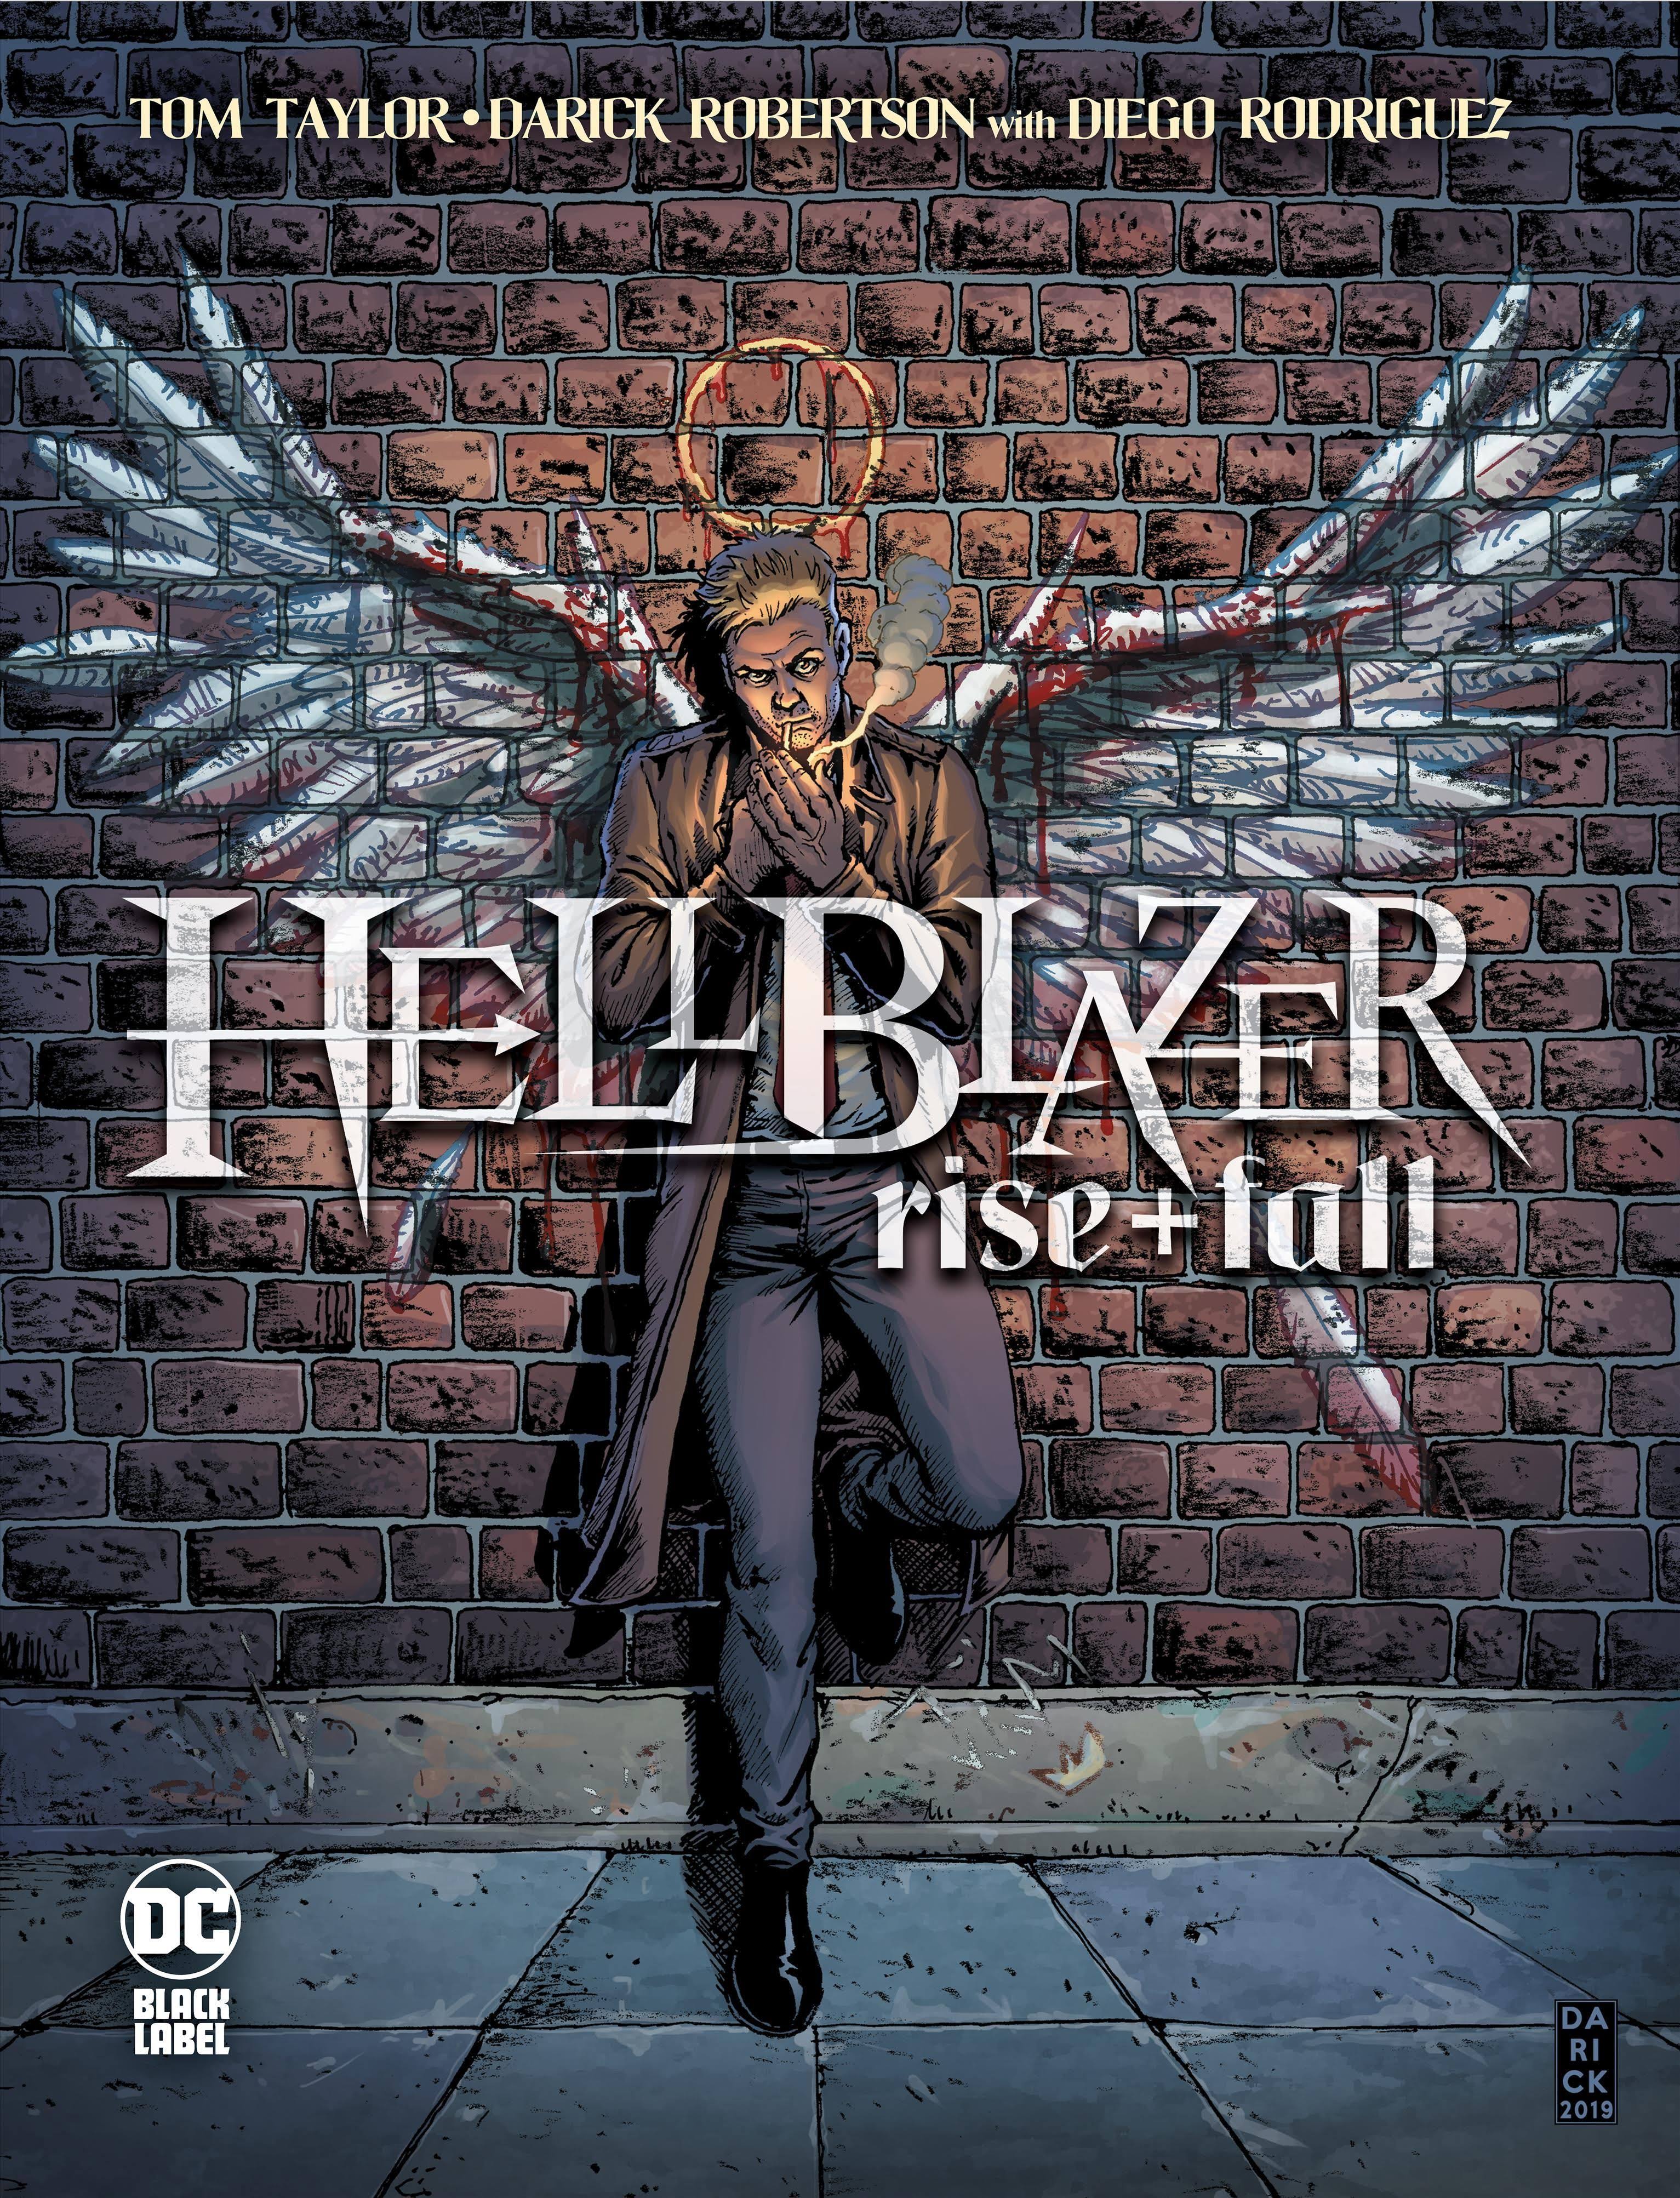 Hellblazer Rise and Fall by Tom Taylor